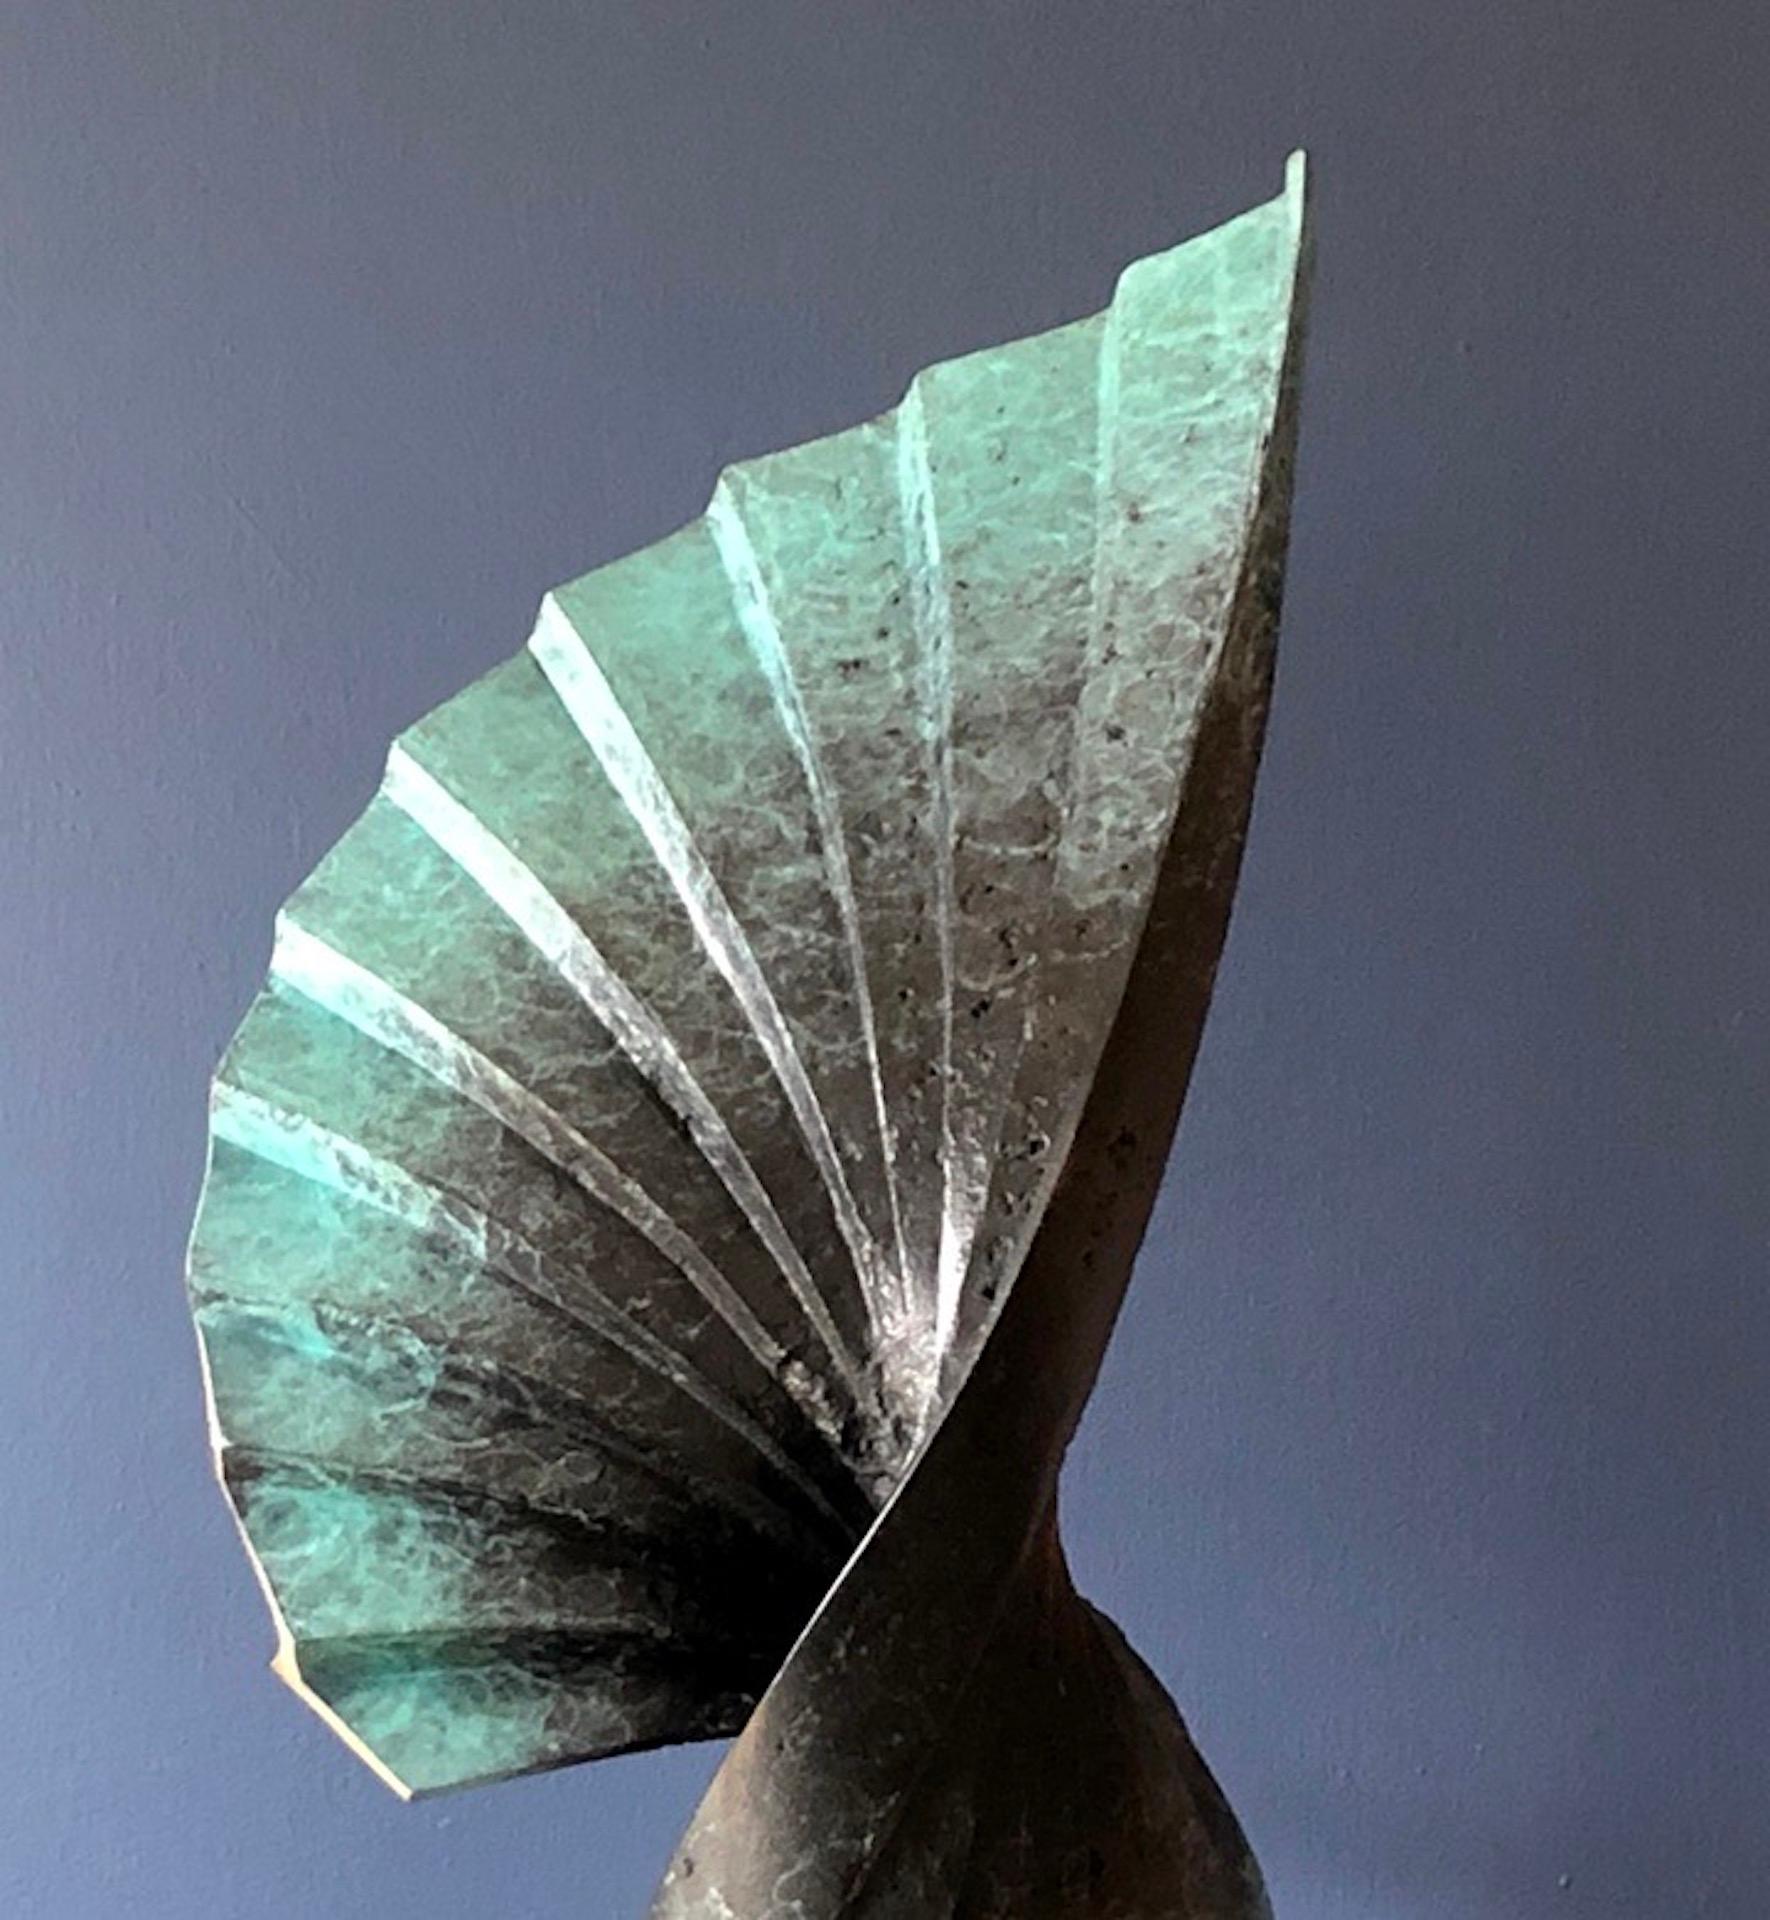 Polished Unique bronze tabletop sculpture based on forms made by folding pleated paper For Sale